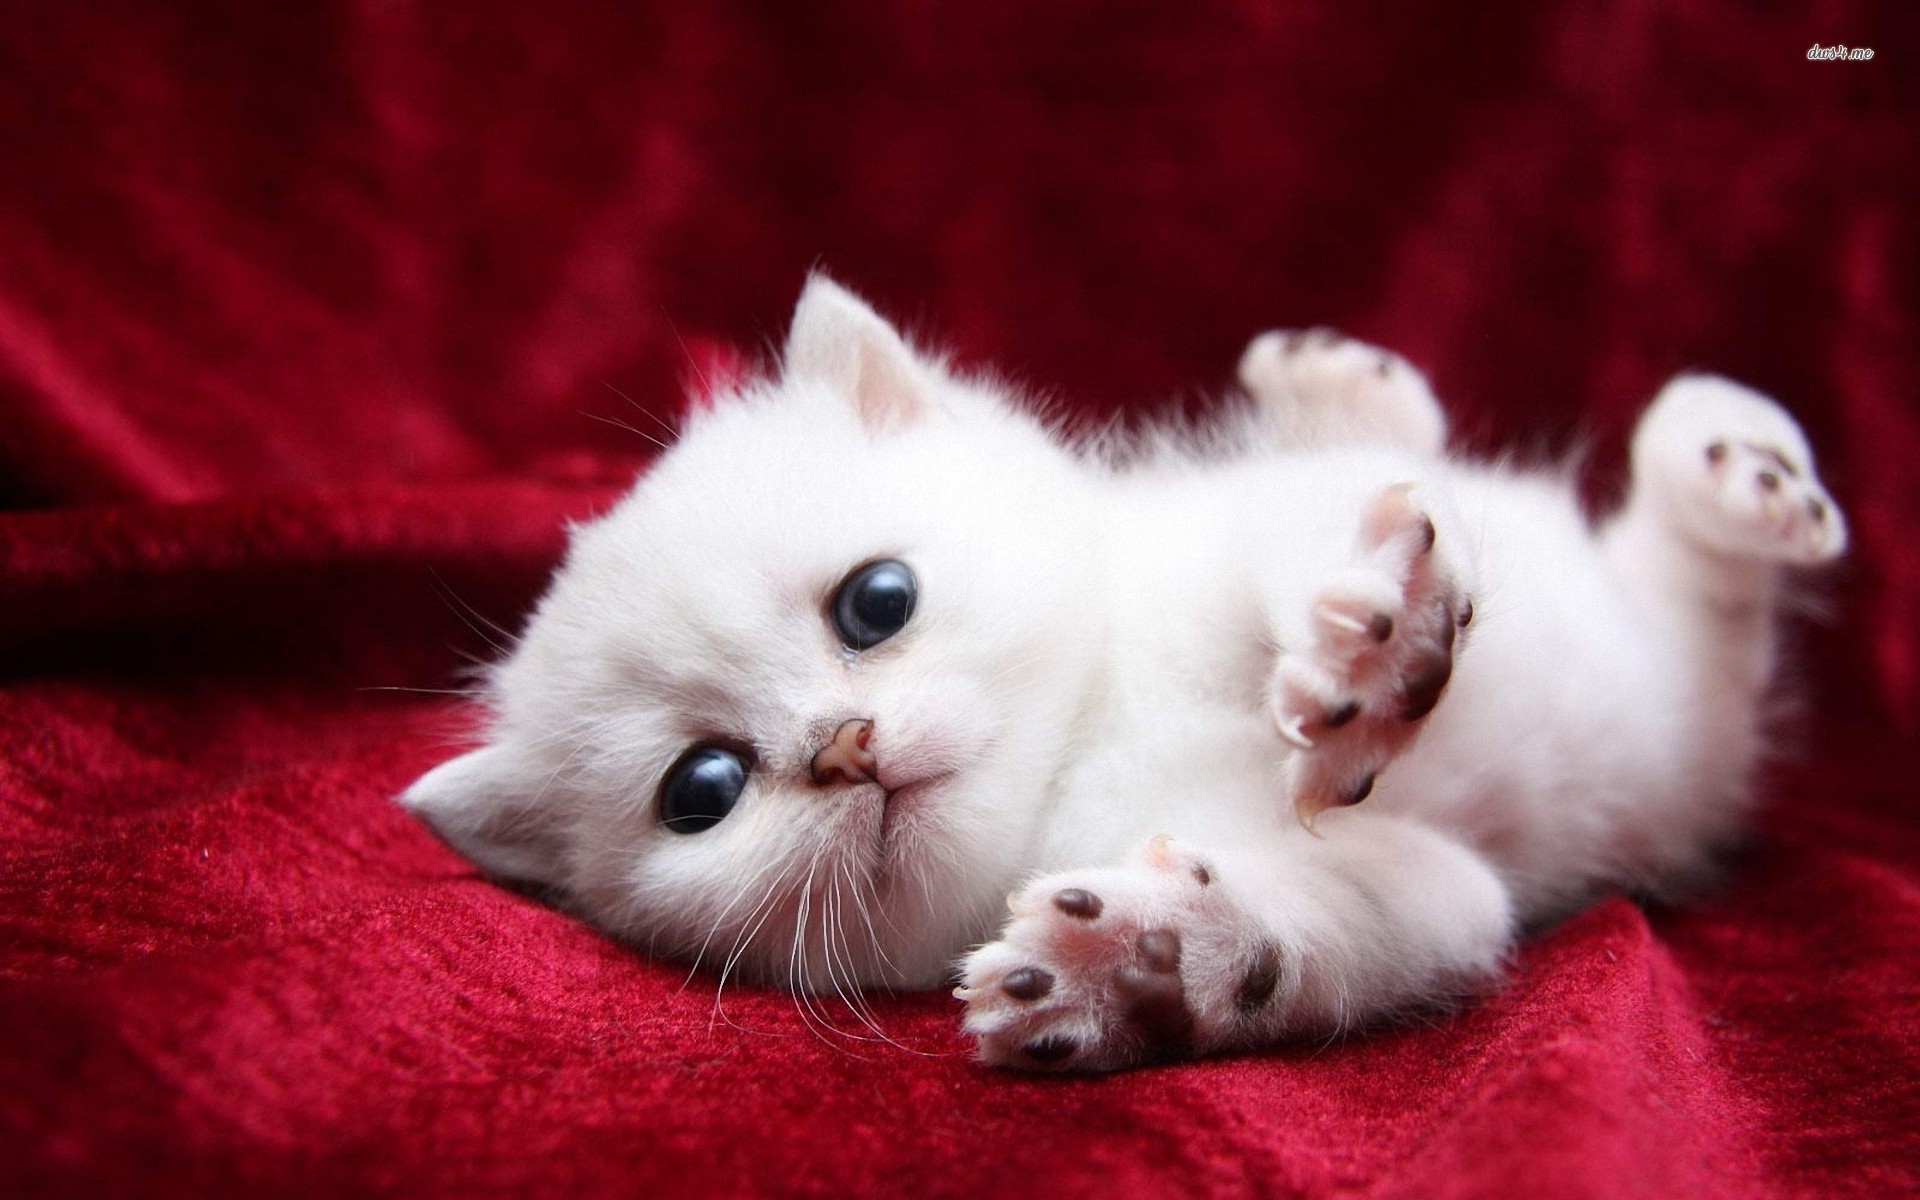 Cute White Cats and Kittens Wallpaper